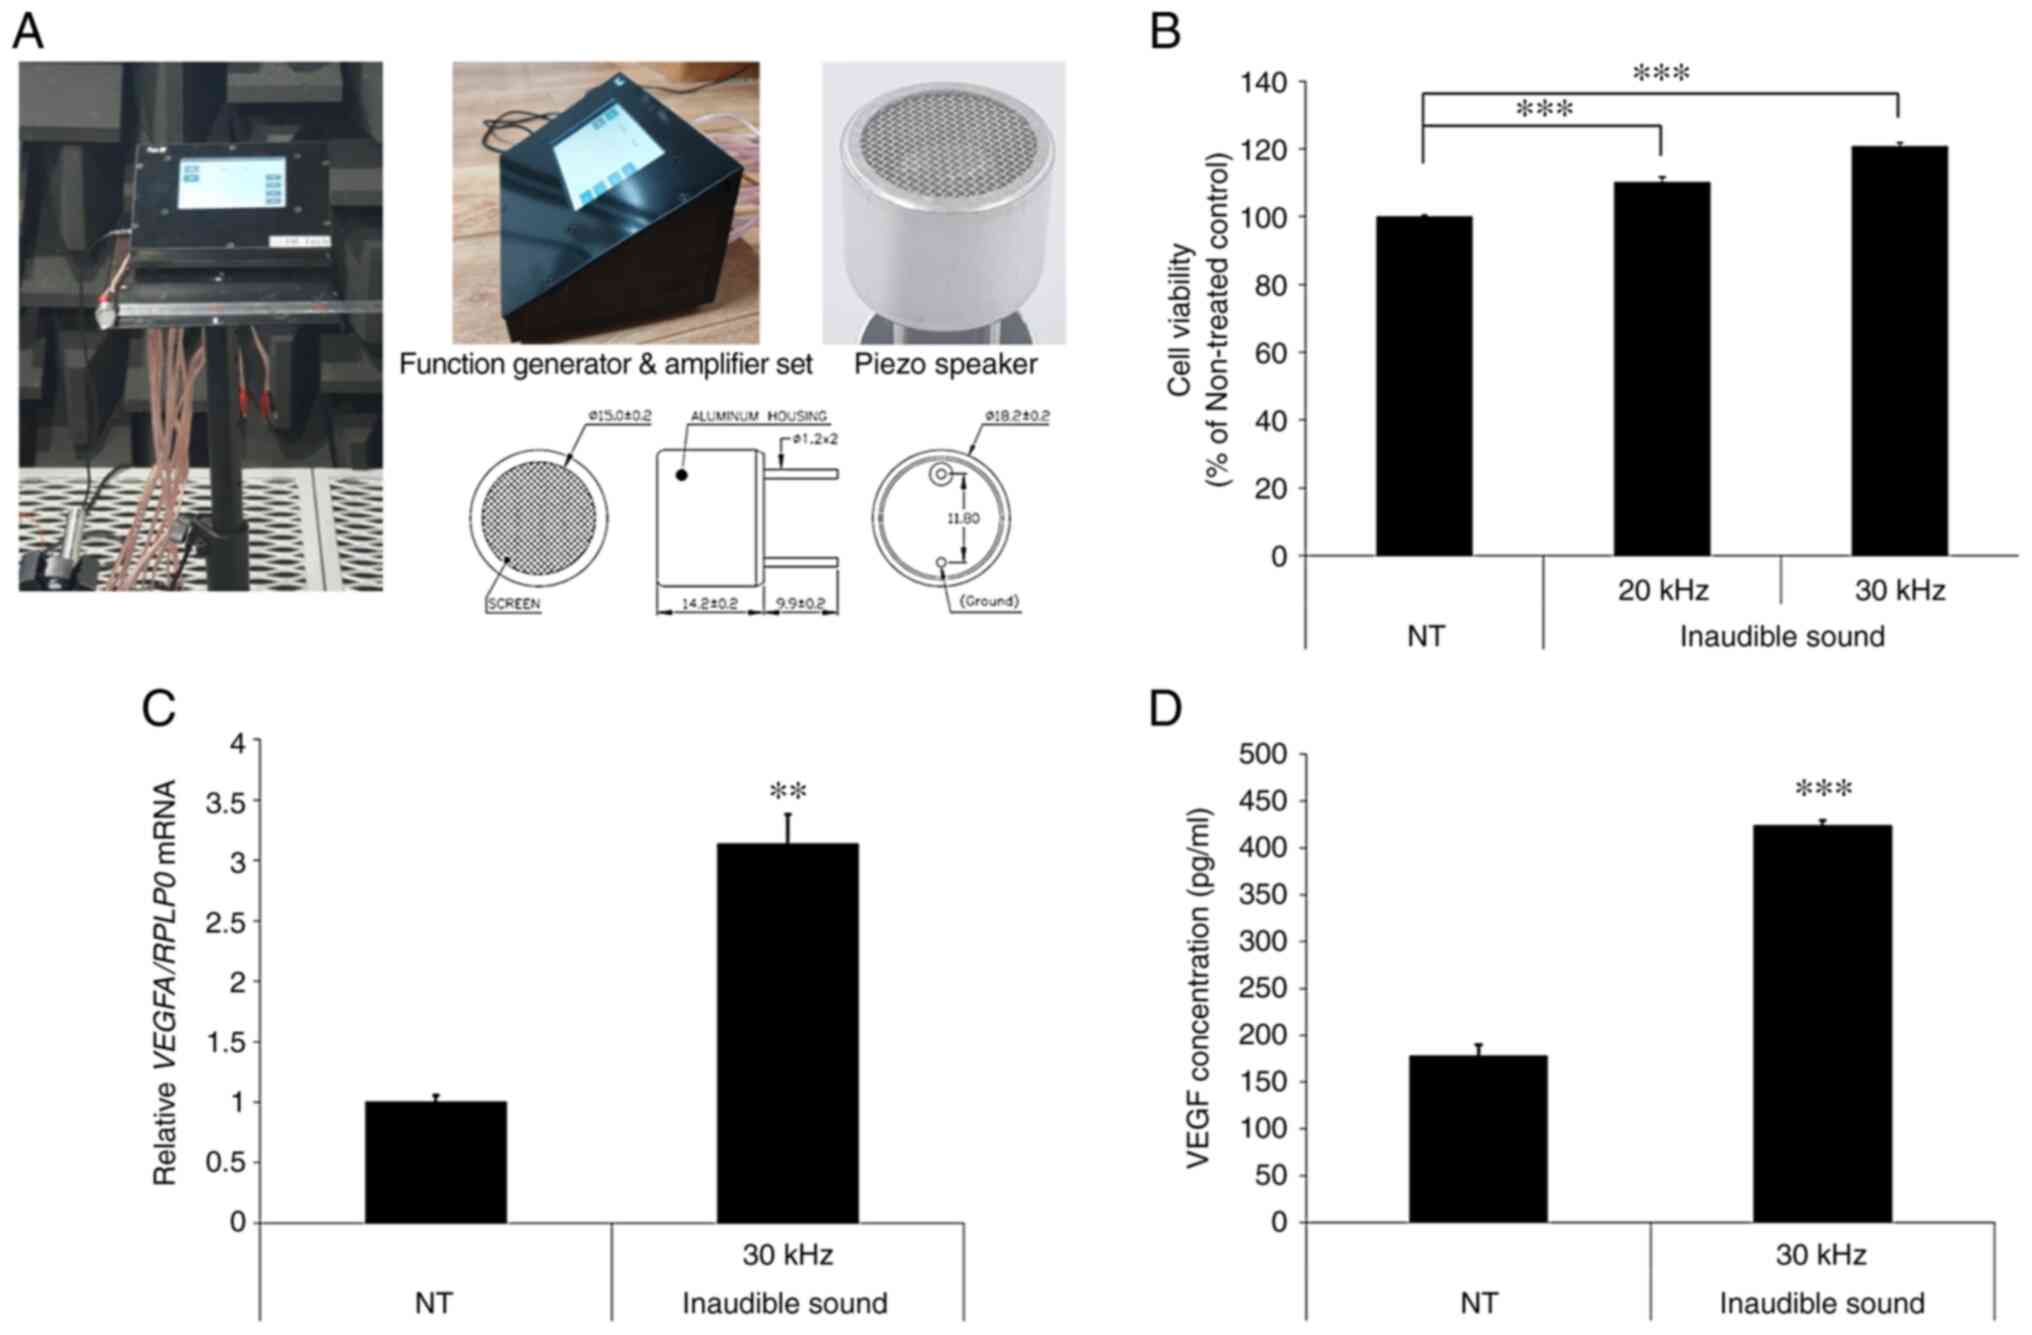 Induction of hair growth in hair follicle cells and organ cultures upon  treatment with 30 kHz frequency inaudible sound via cell proliferation and  antiapoptotic effects